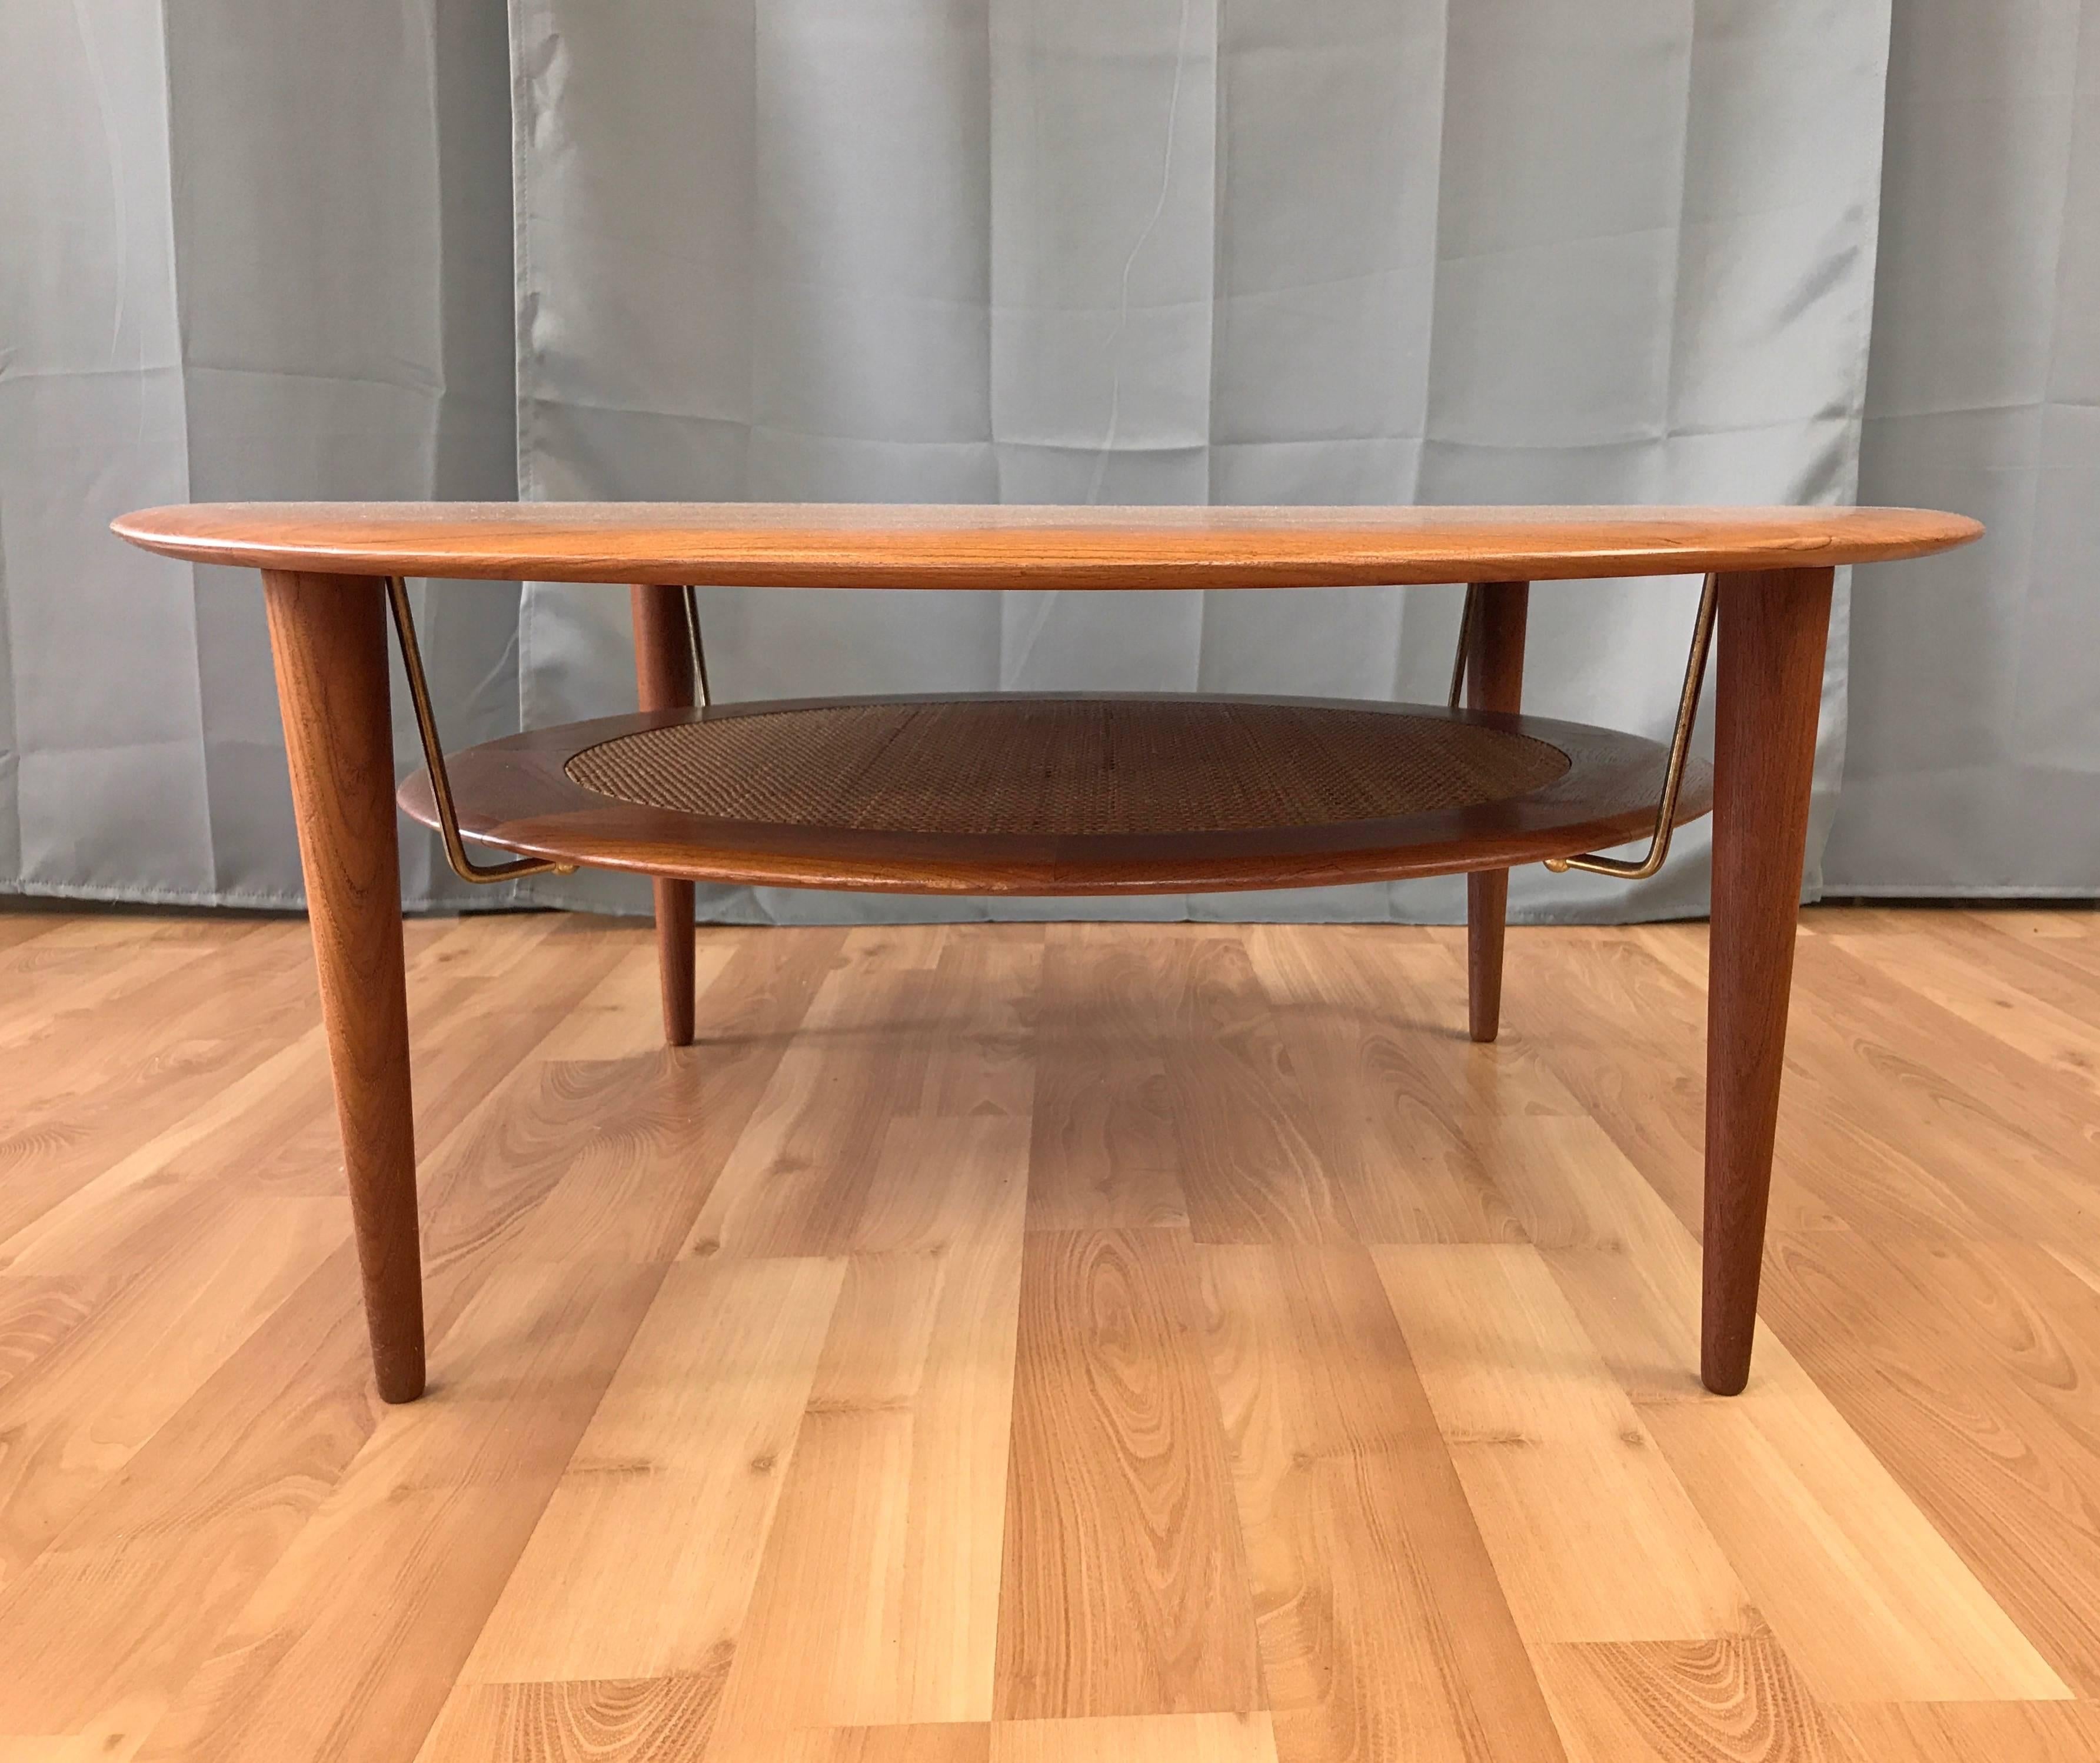 Handsomely distilled Danish modern design, with an expansive disc top and tapered legs handcrafted in solid teak. Floating lower tier features a sleek teak ring with original tightly woven rattan inset, and is suspended by four discreet brass rods.